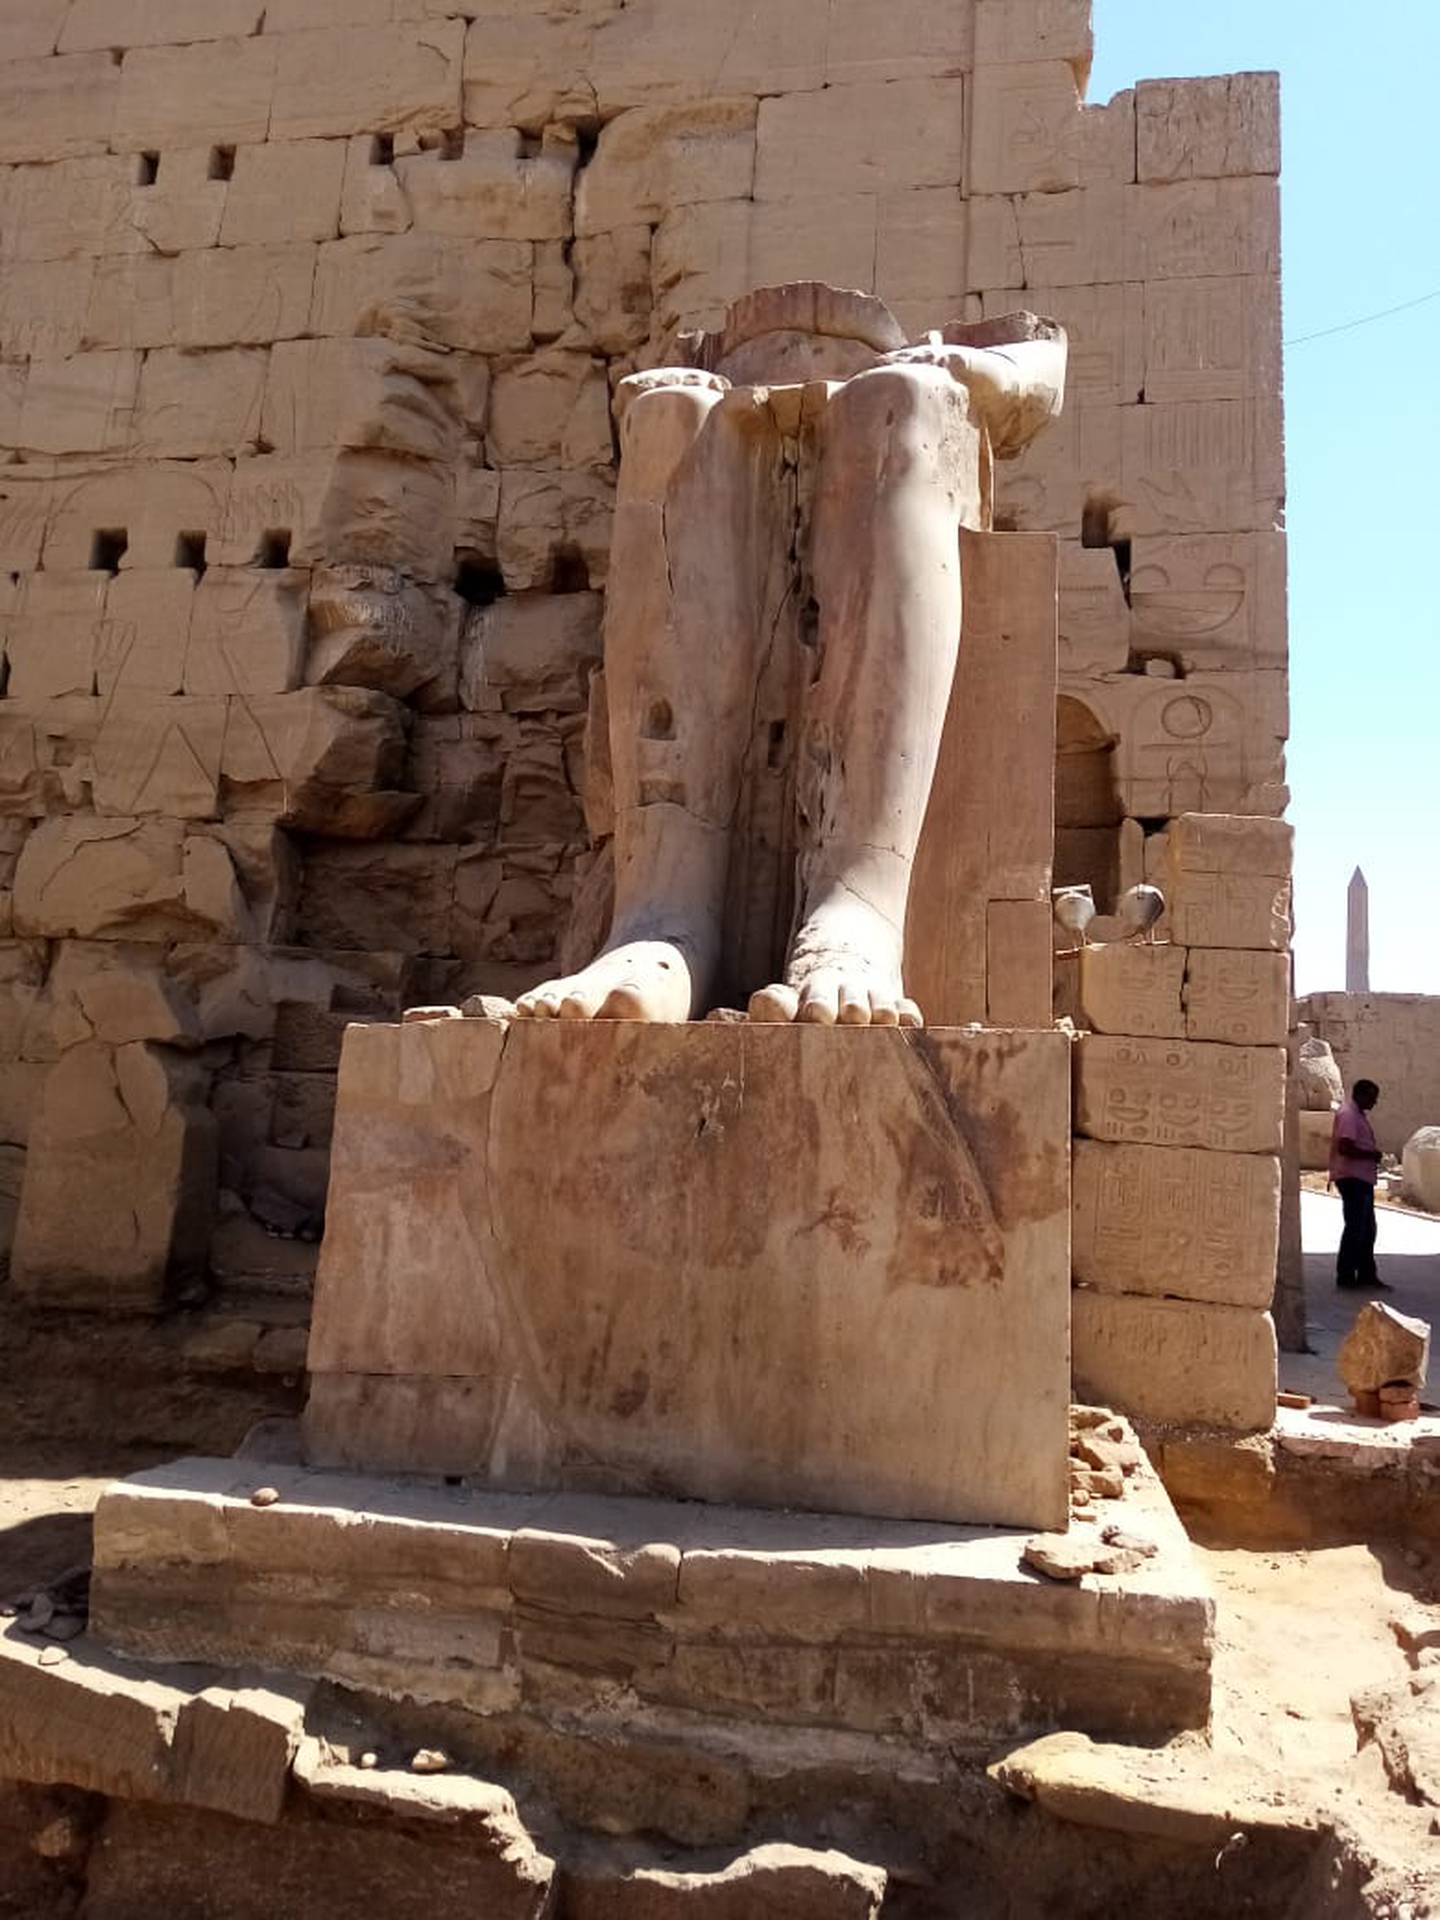 The statue of Thutmose II in Luxor's Karnak Temple in 2021 before a government restoration project repaired significant damage. Photo: Egypt's Ministry of Tourism and Antiquities